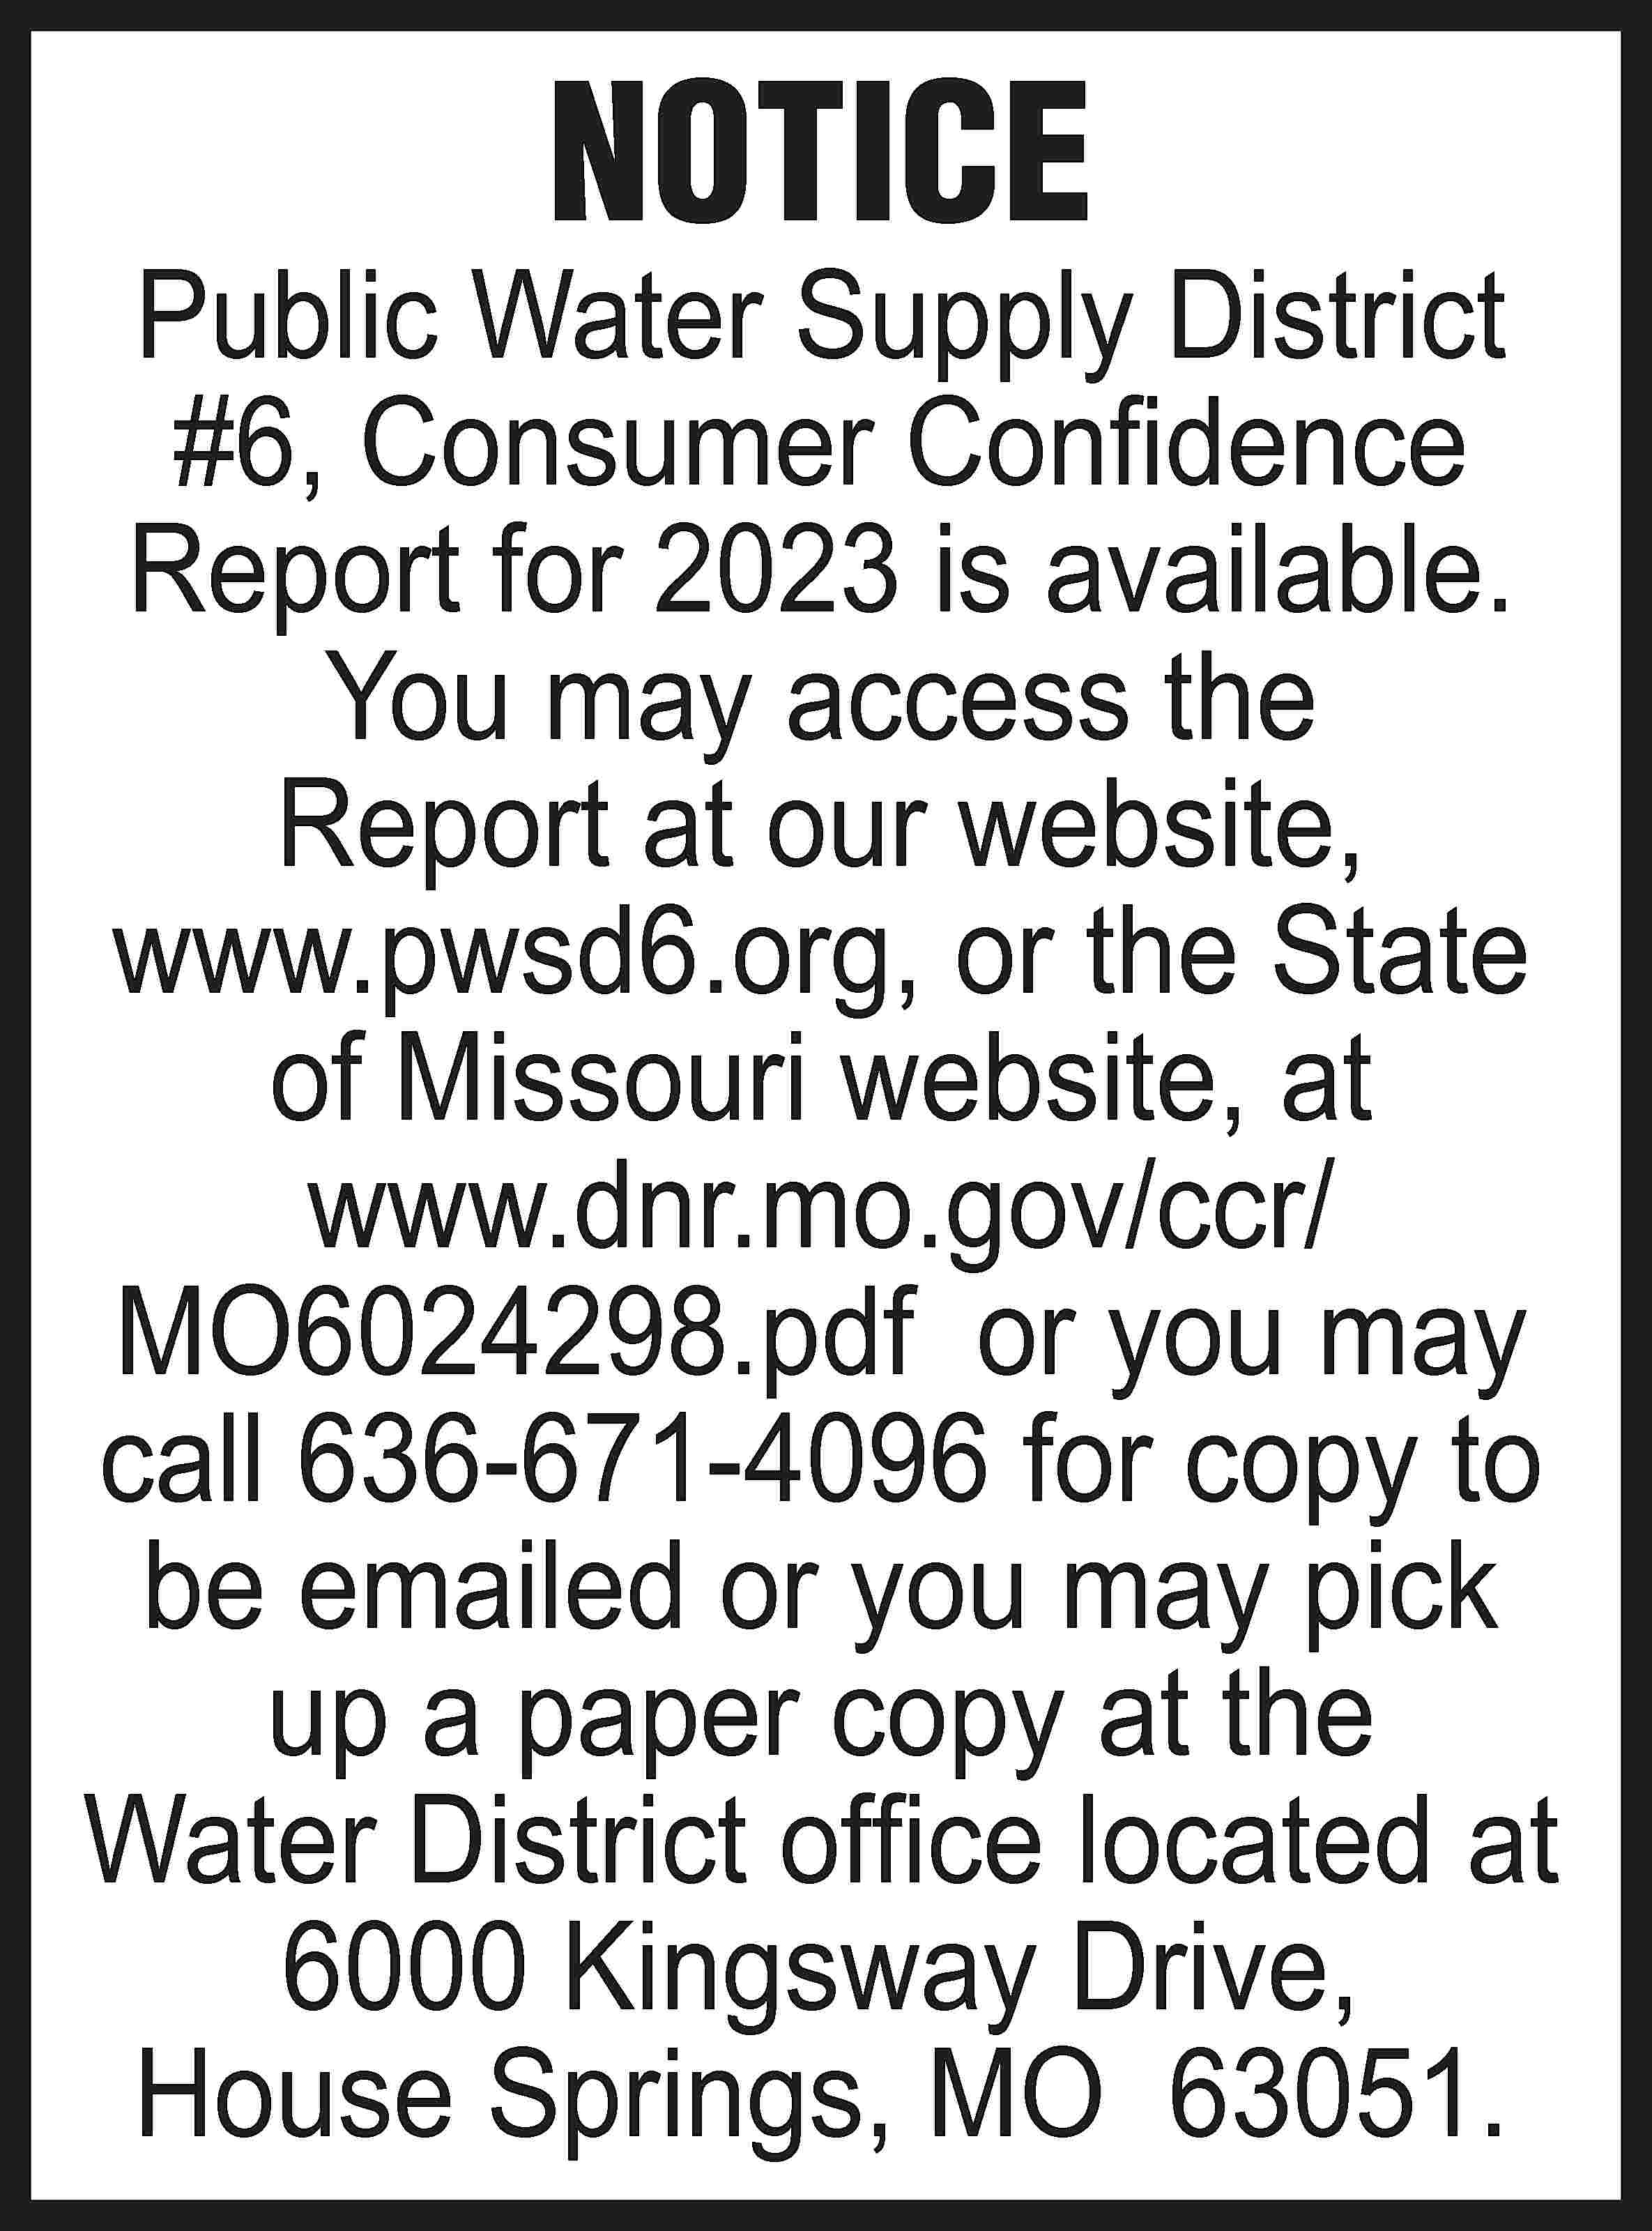 NOTICE Public Water Supply District  NOTICE Public Water Supply District #6, Consumer Confidence Report for 2023 is available. You may access the Report at our website, www.pwsd6.org, or the State of Missouri website, at www.dnr.mo.gov/ccr/ MO6024298.pdf or you may call 636-671-4096 for copy to be emailed or you may pick up a paper copy at the Water District office located at 6000 Kingsway Drive, House Springs, MO 63051.